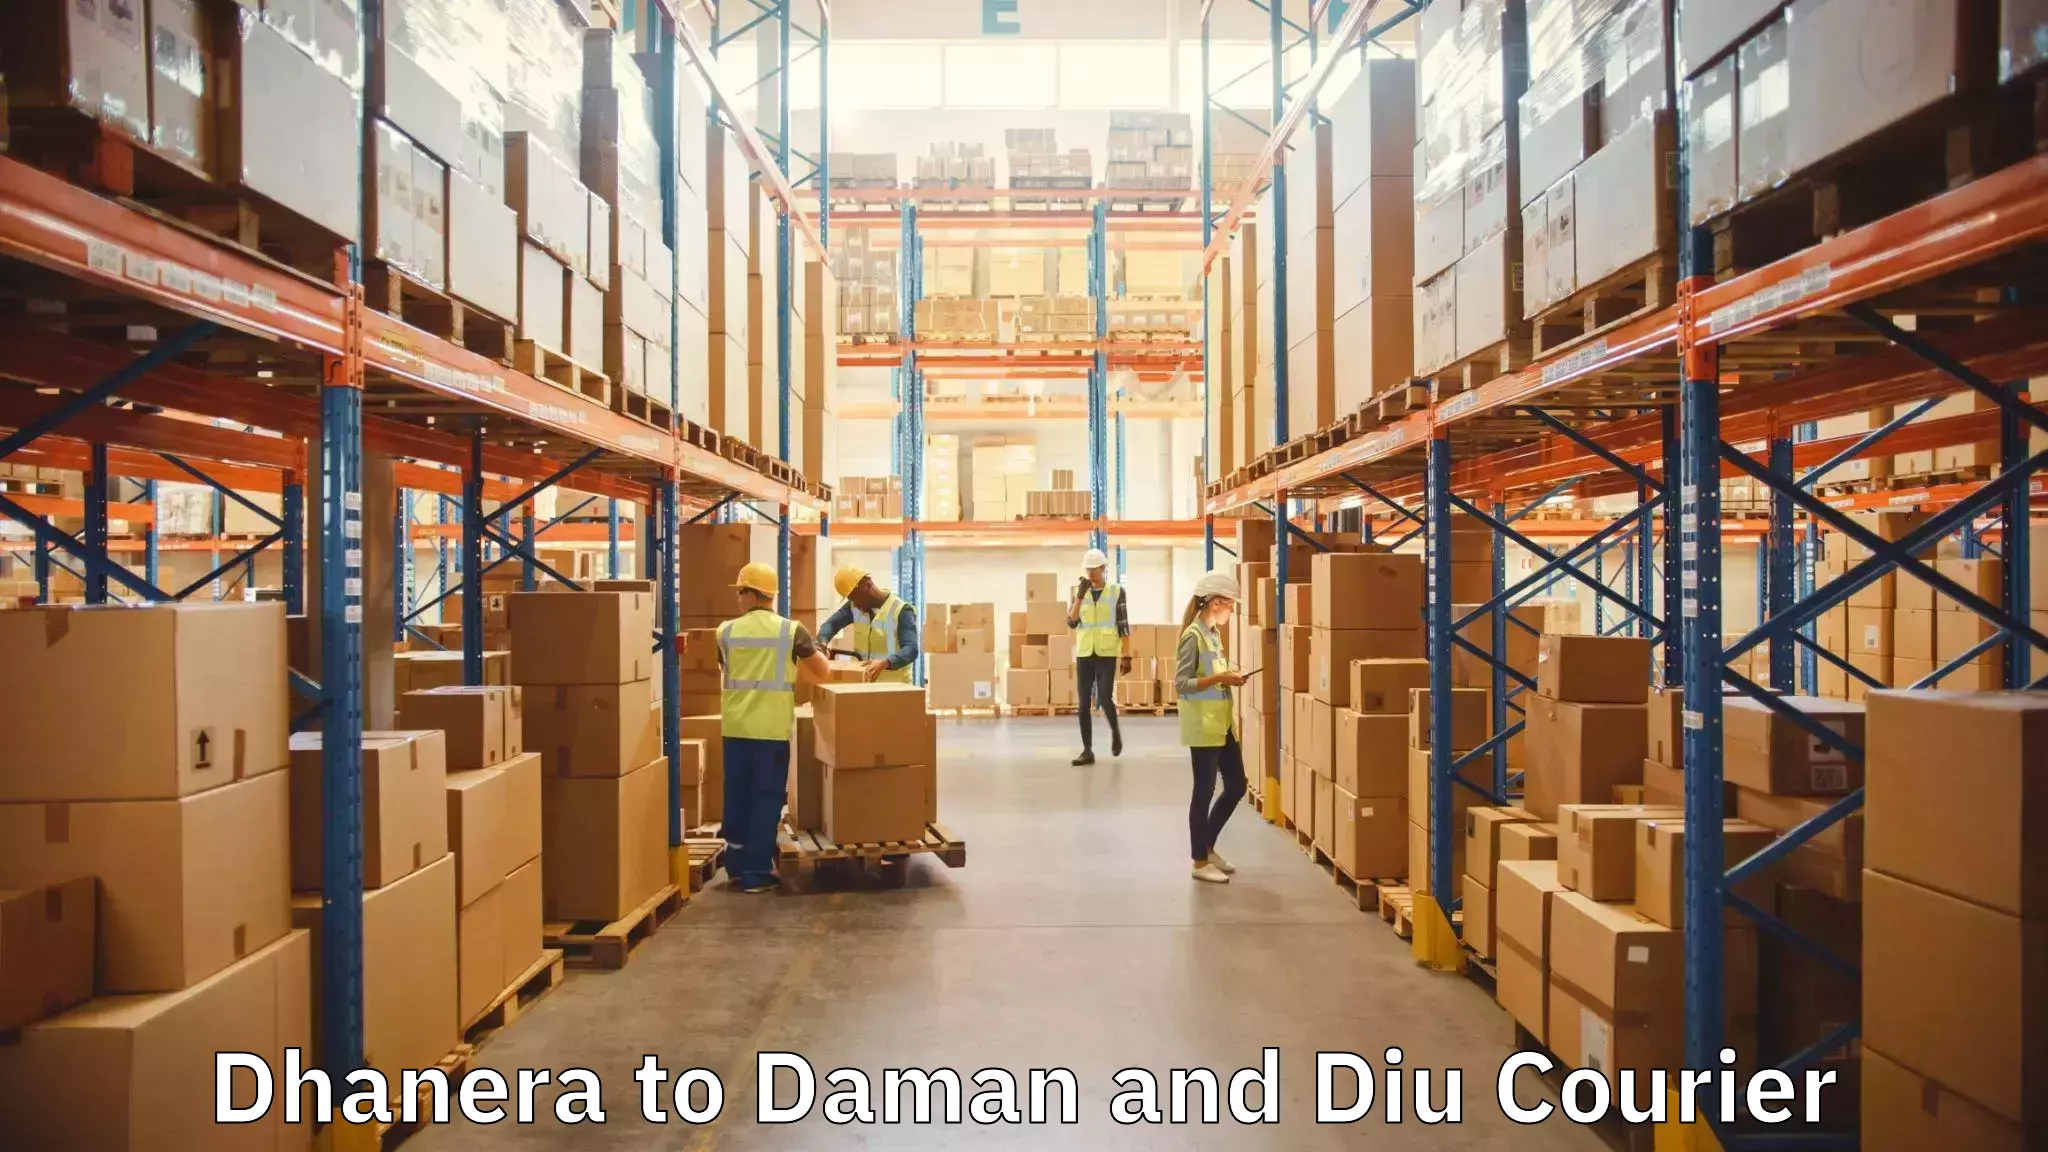 Professional movers Dhanera to Daman